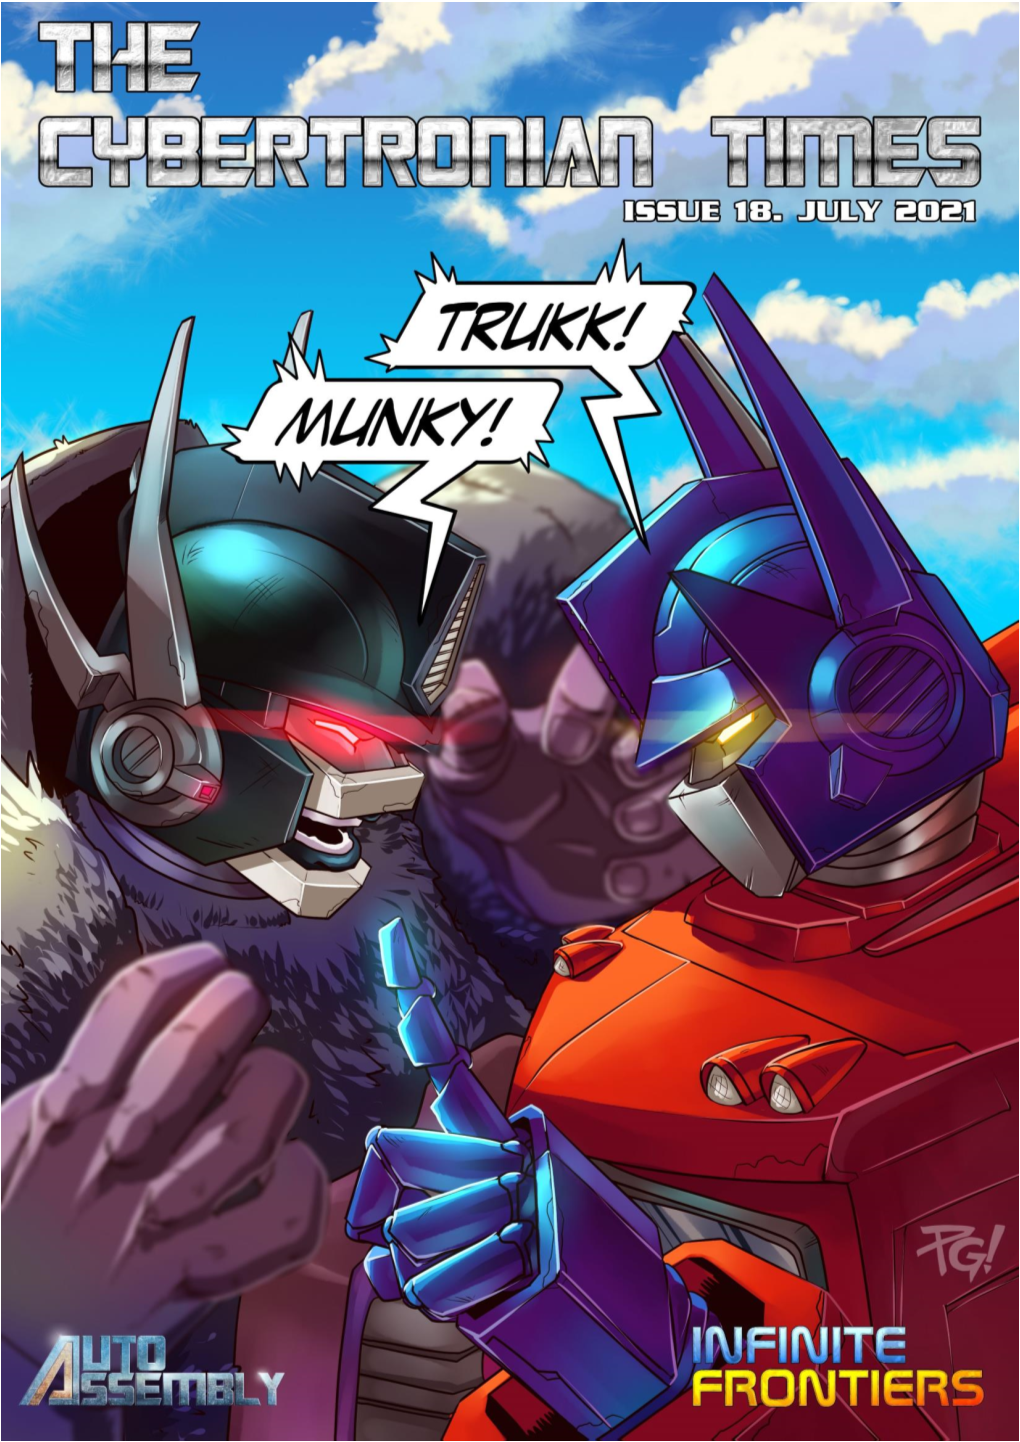 The Cybertronian Times Issue 18